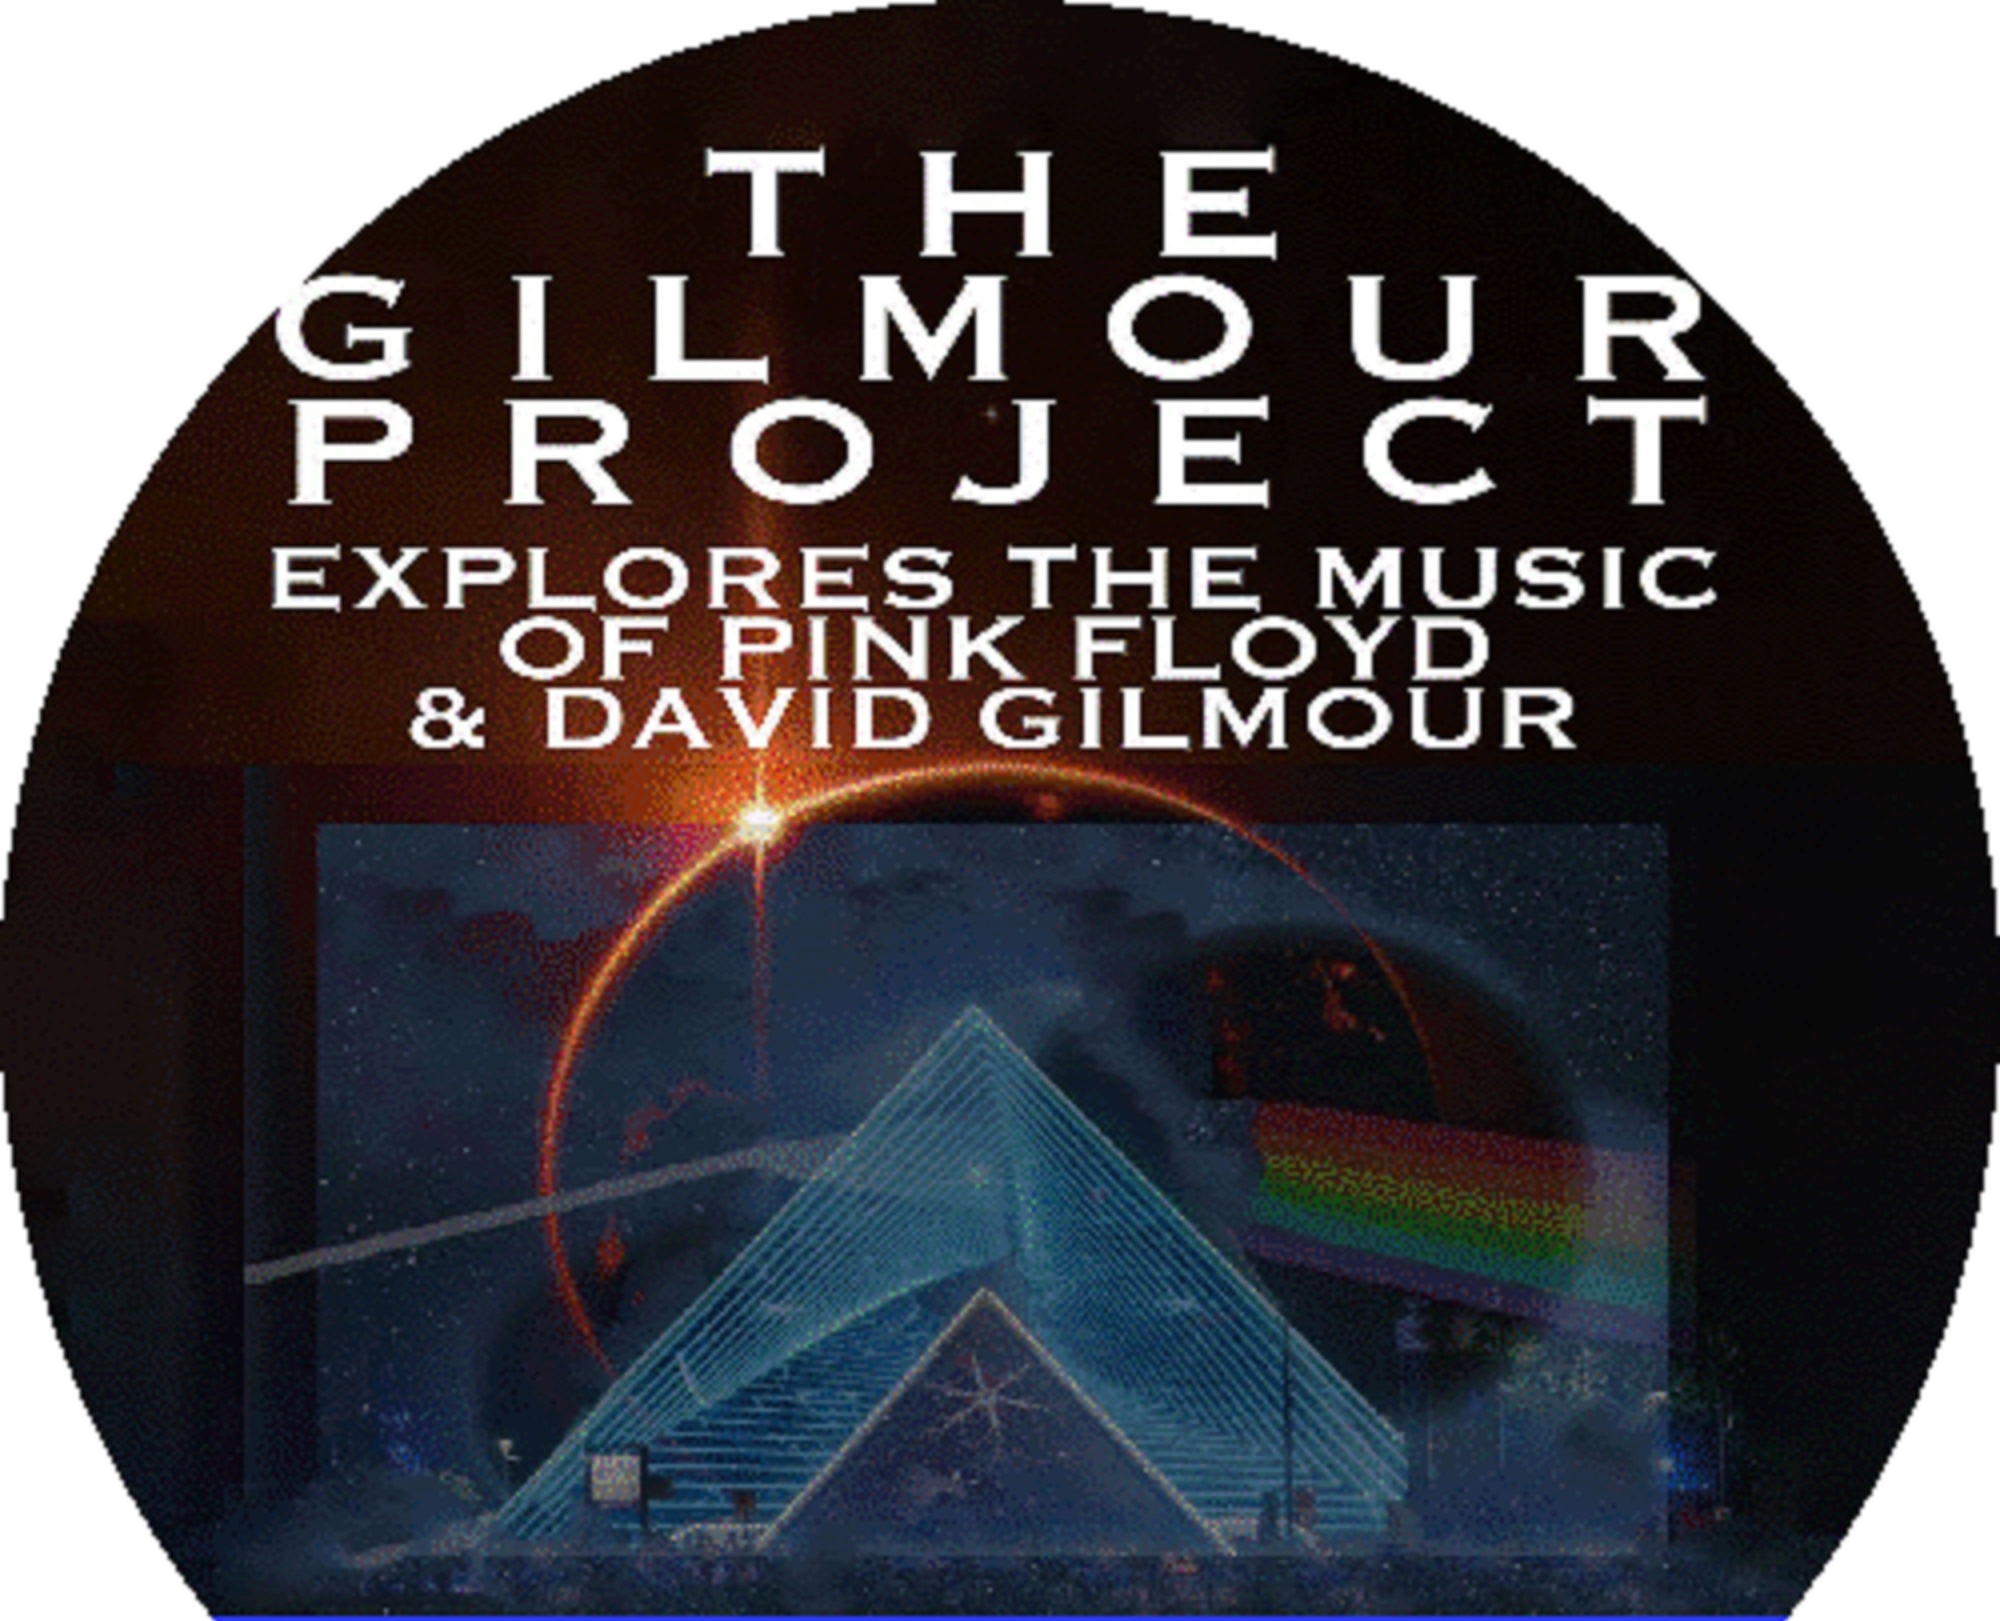 Celebrating the 50th Anniversary of David Gilmour & Pink Floyd’s Dark Side of the Moon